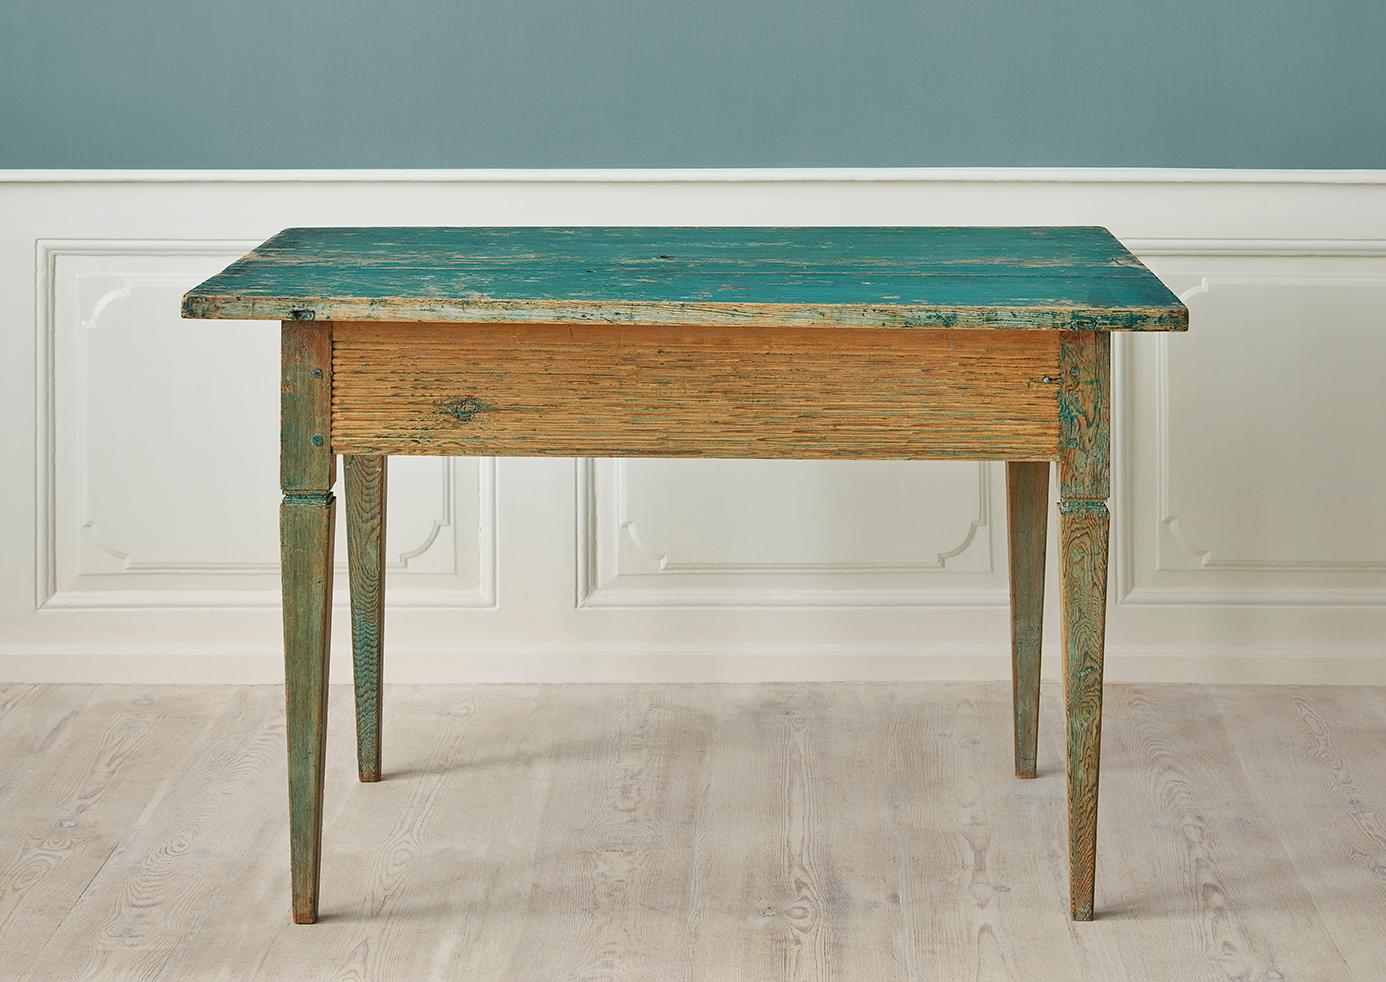 Sweden, Late 18th Century

Antique genuine gustavian table from Sweden made around 1790. Painted in green. 

H 77 x W 117 x D 81 cm